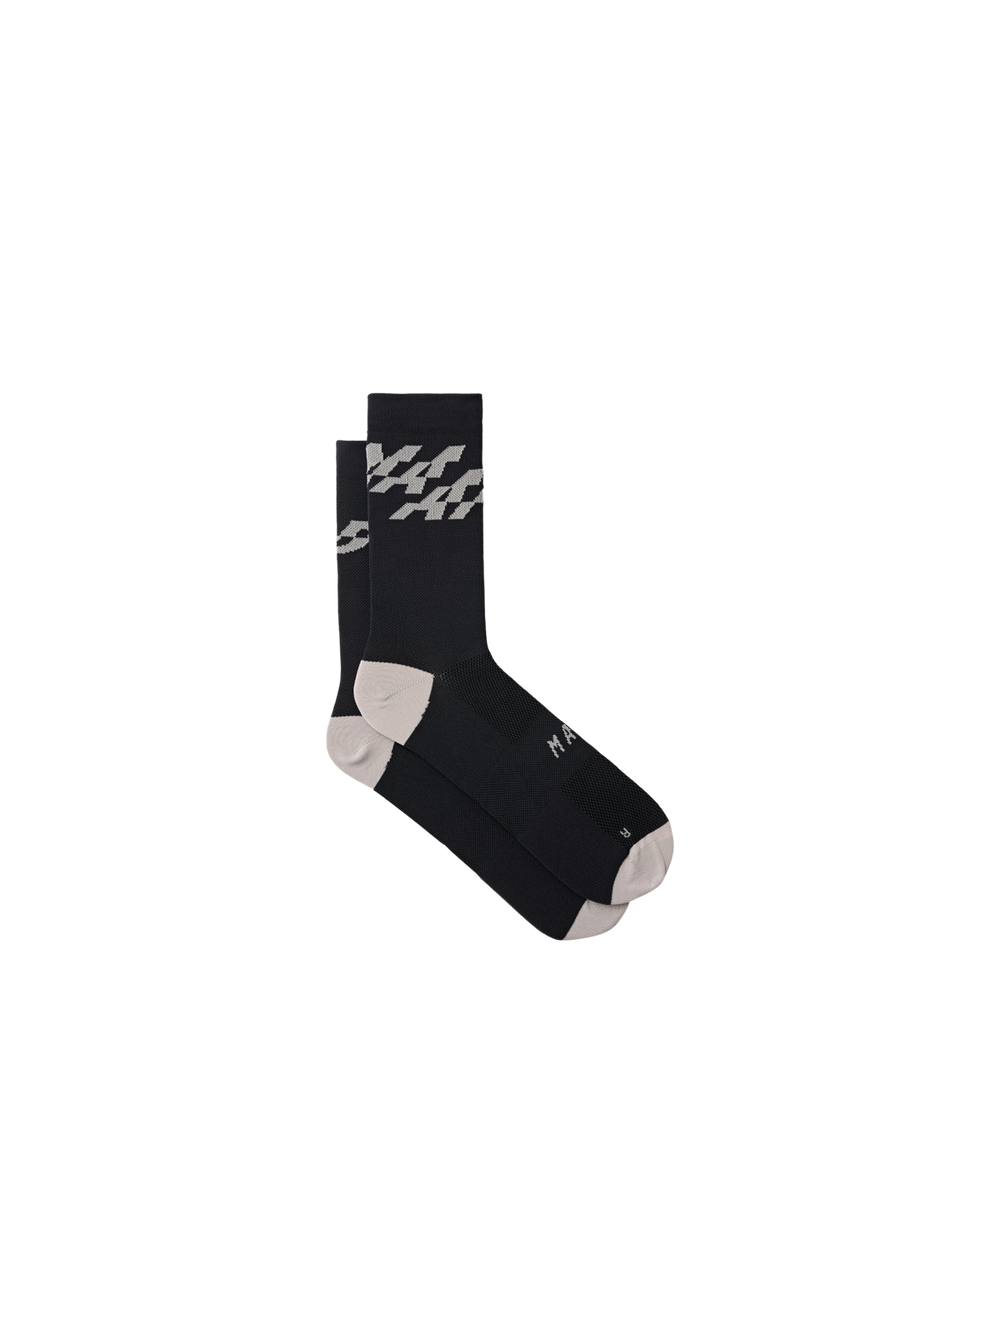 Product Image for Fragment Sock